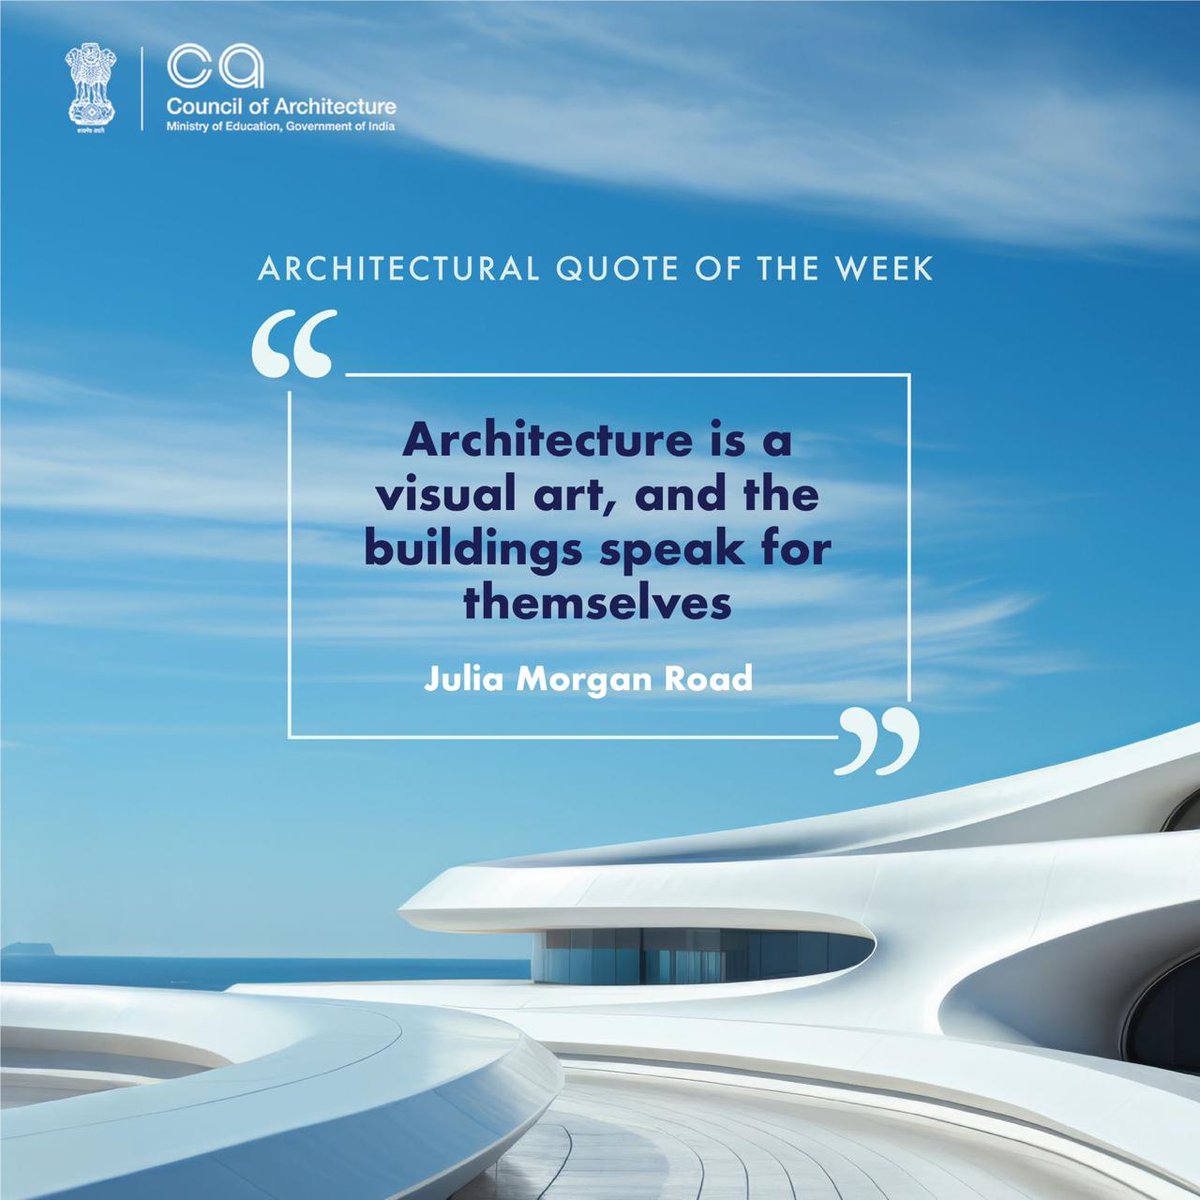 Architectural quote of the week.

#motivationalmonday #motivation #quoteoftheweek #architecture #councilofarchitecture #COA